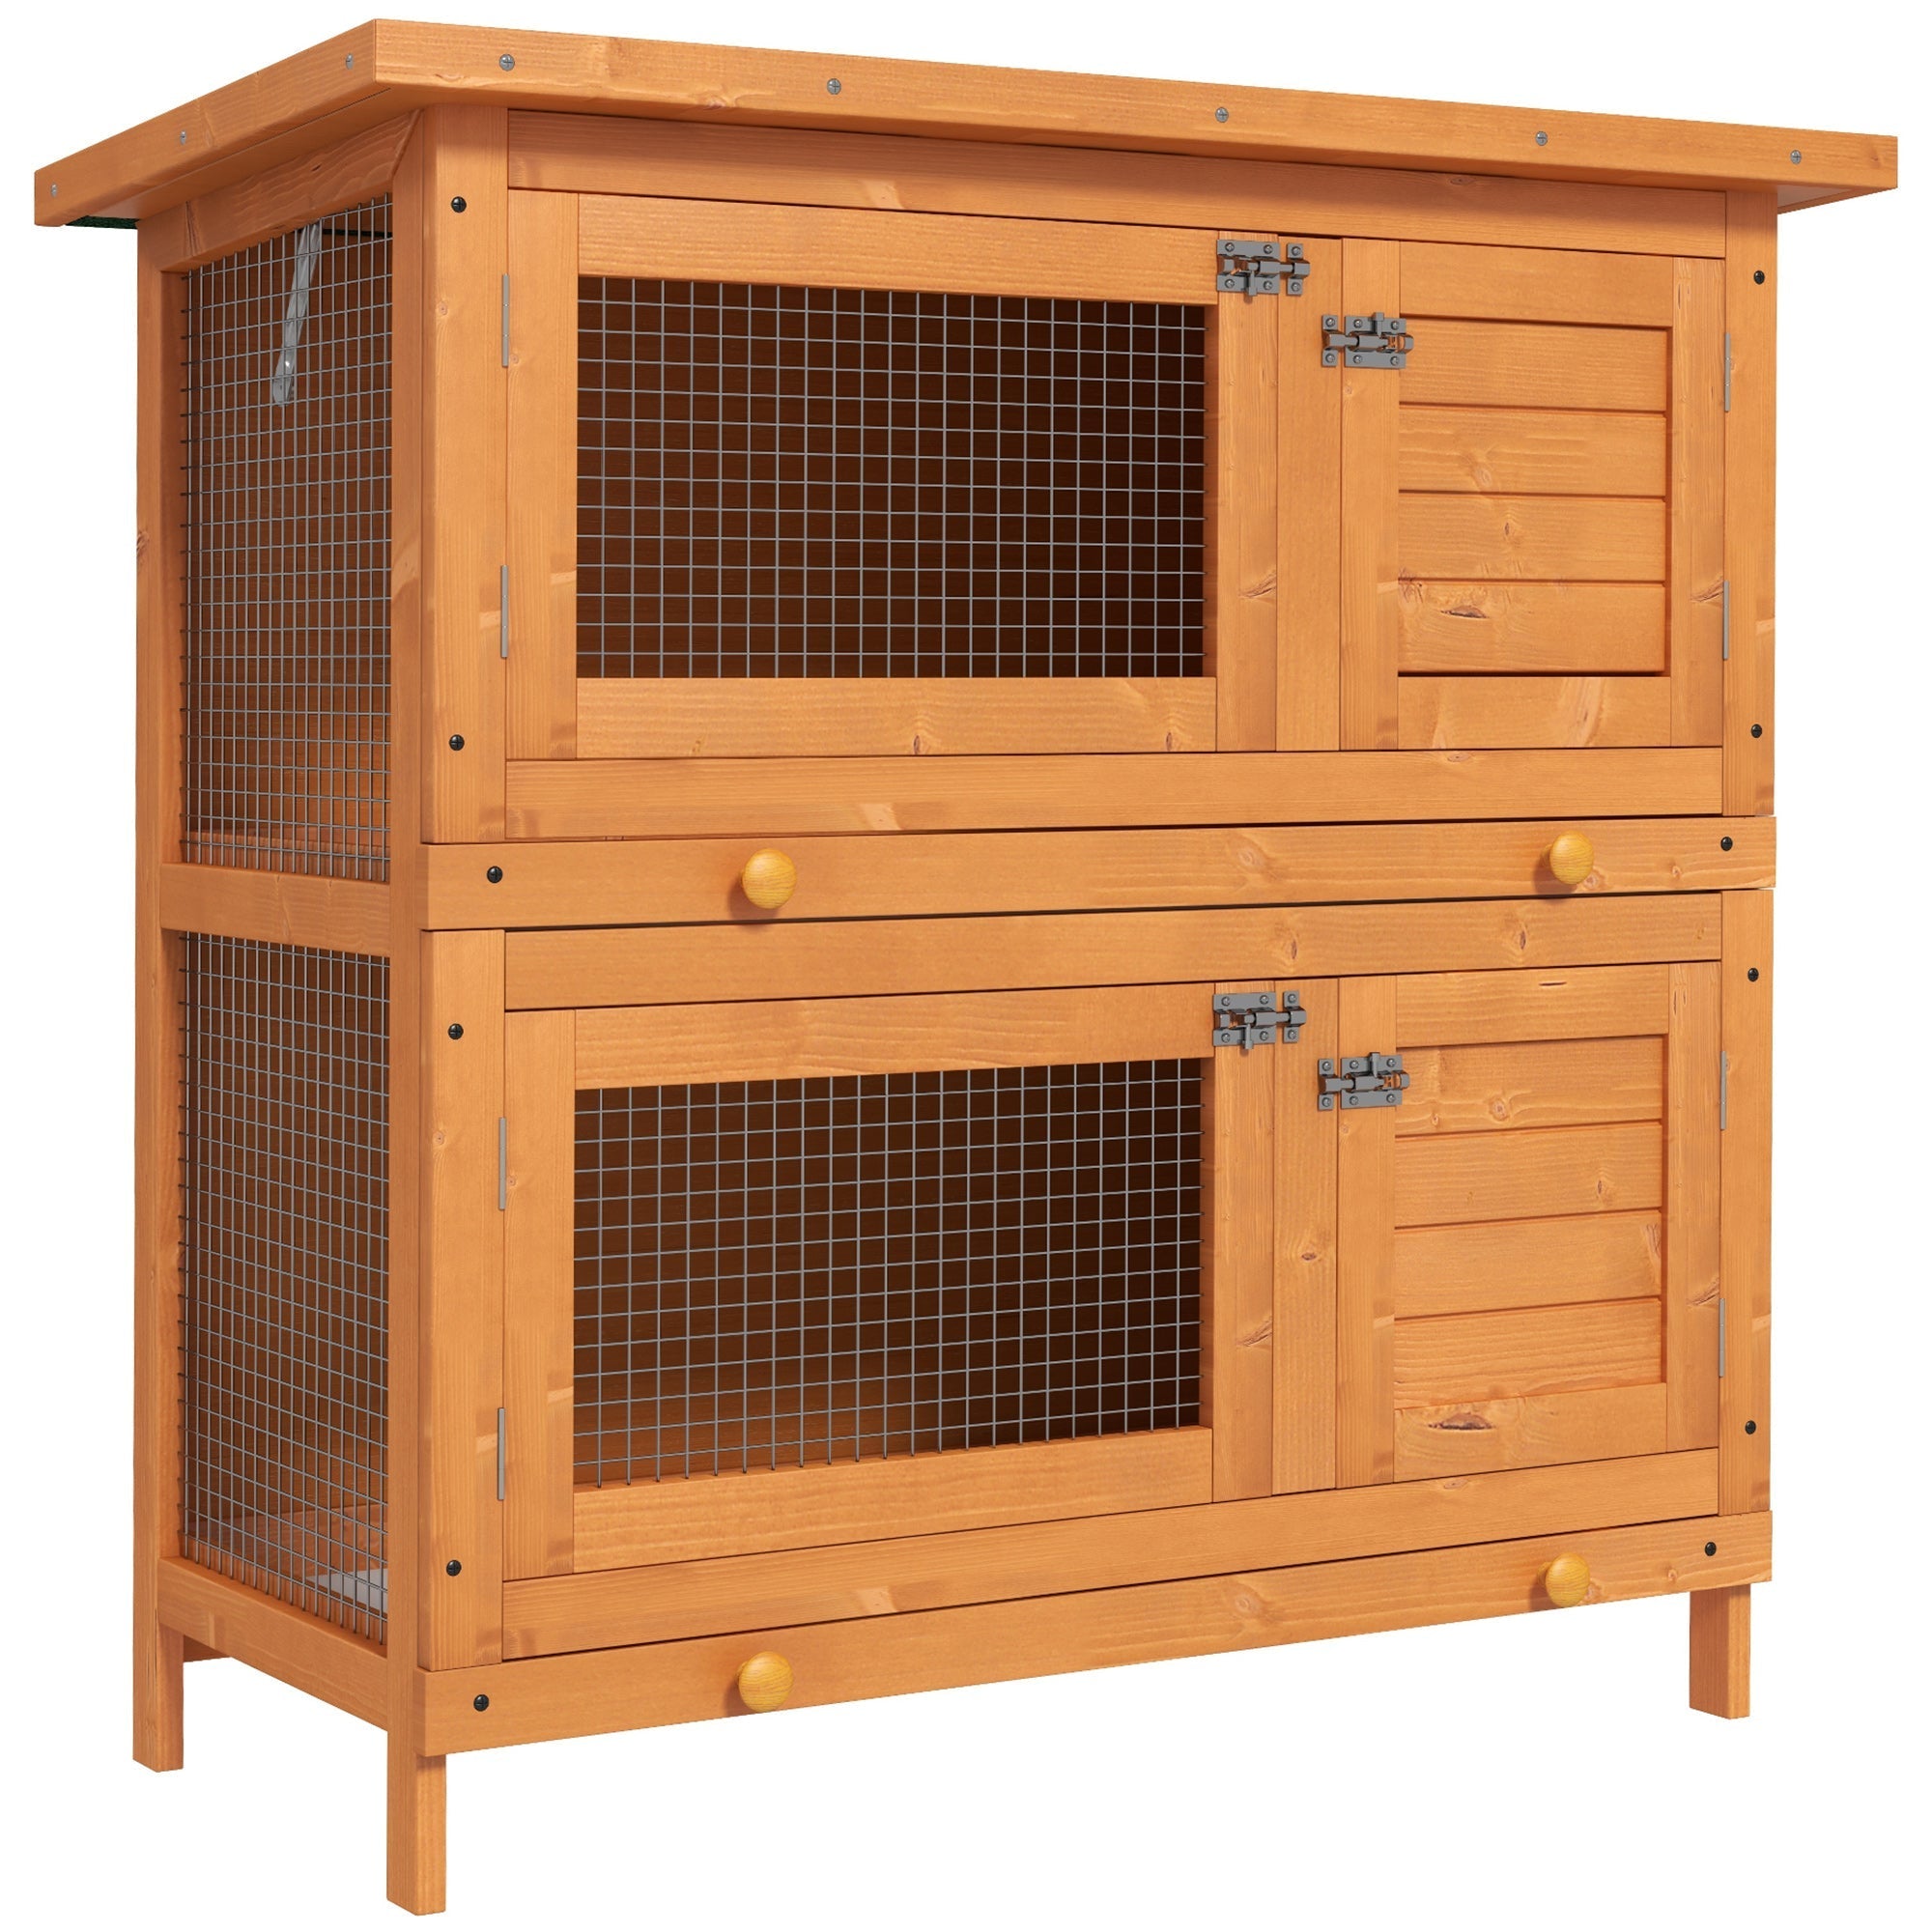 2-Tier Wooden Rabbit Hutch Guinea Pig Hutch Duck House Double Decker Pet Cage with Sliding Tray Opening Top, PawHut,